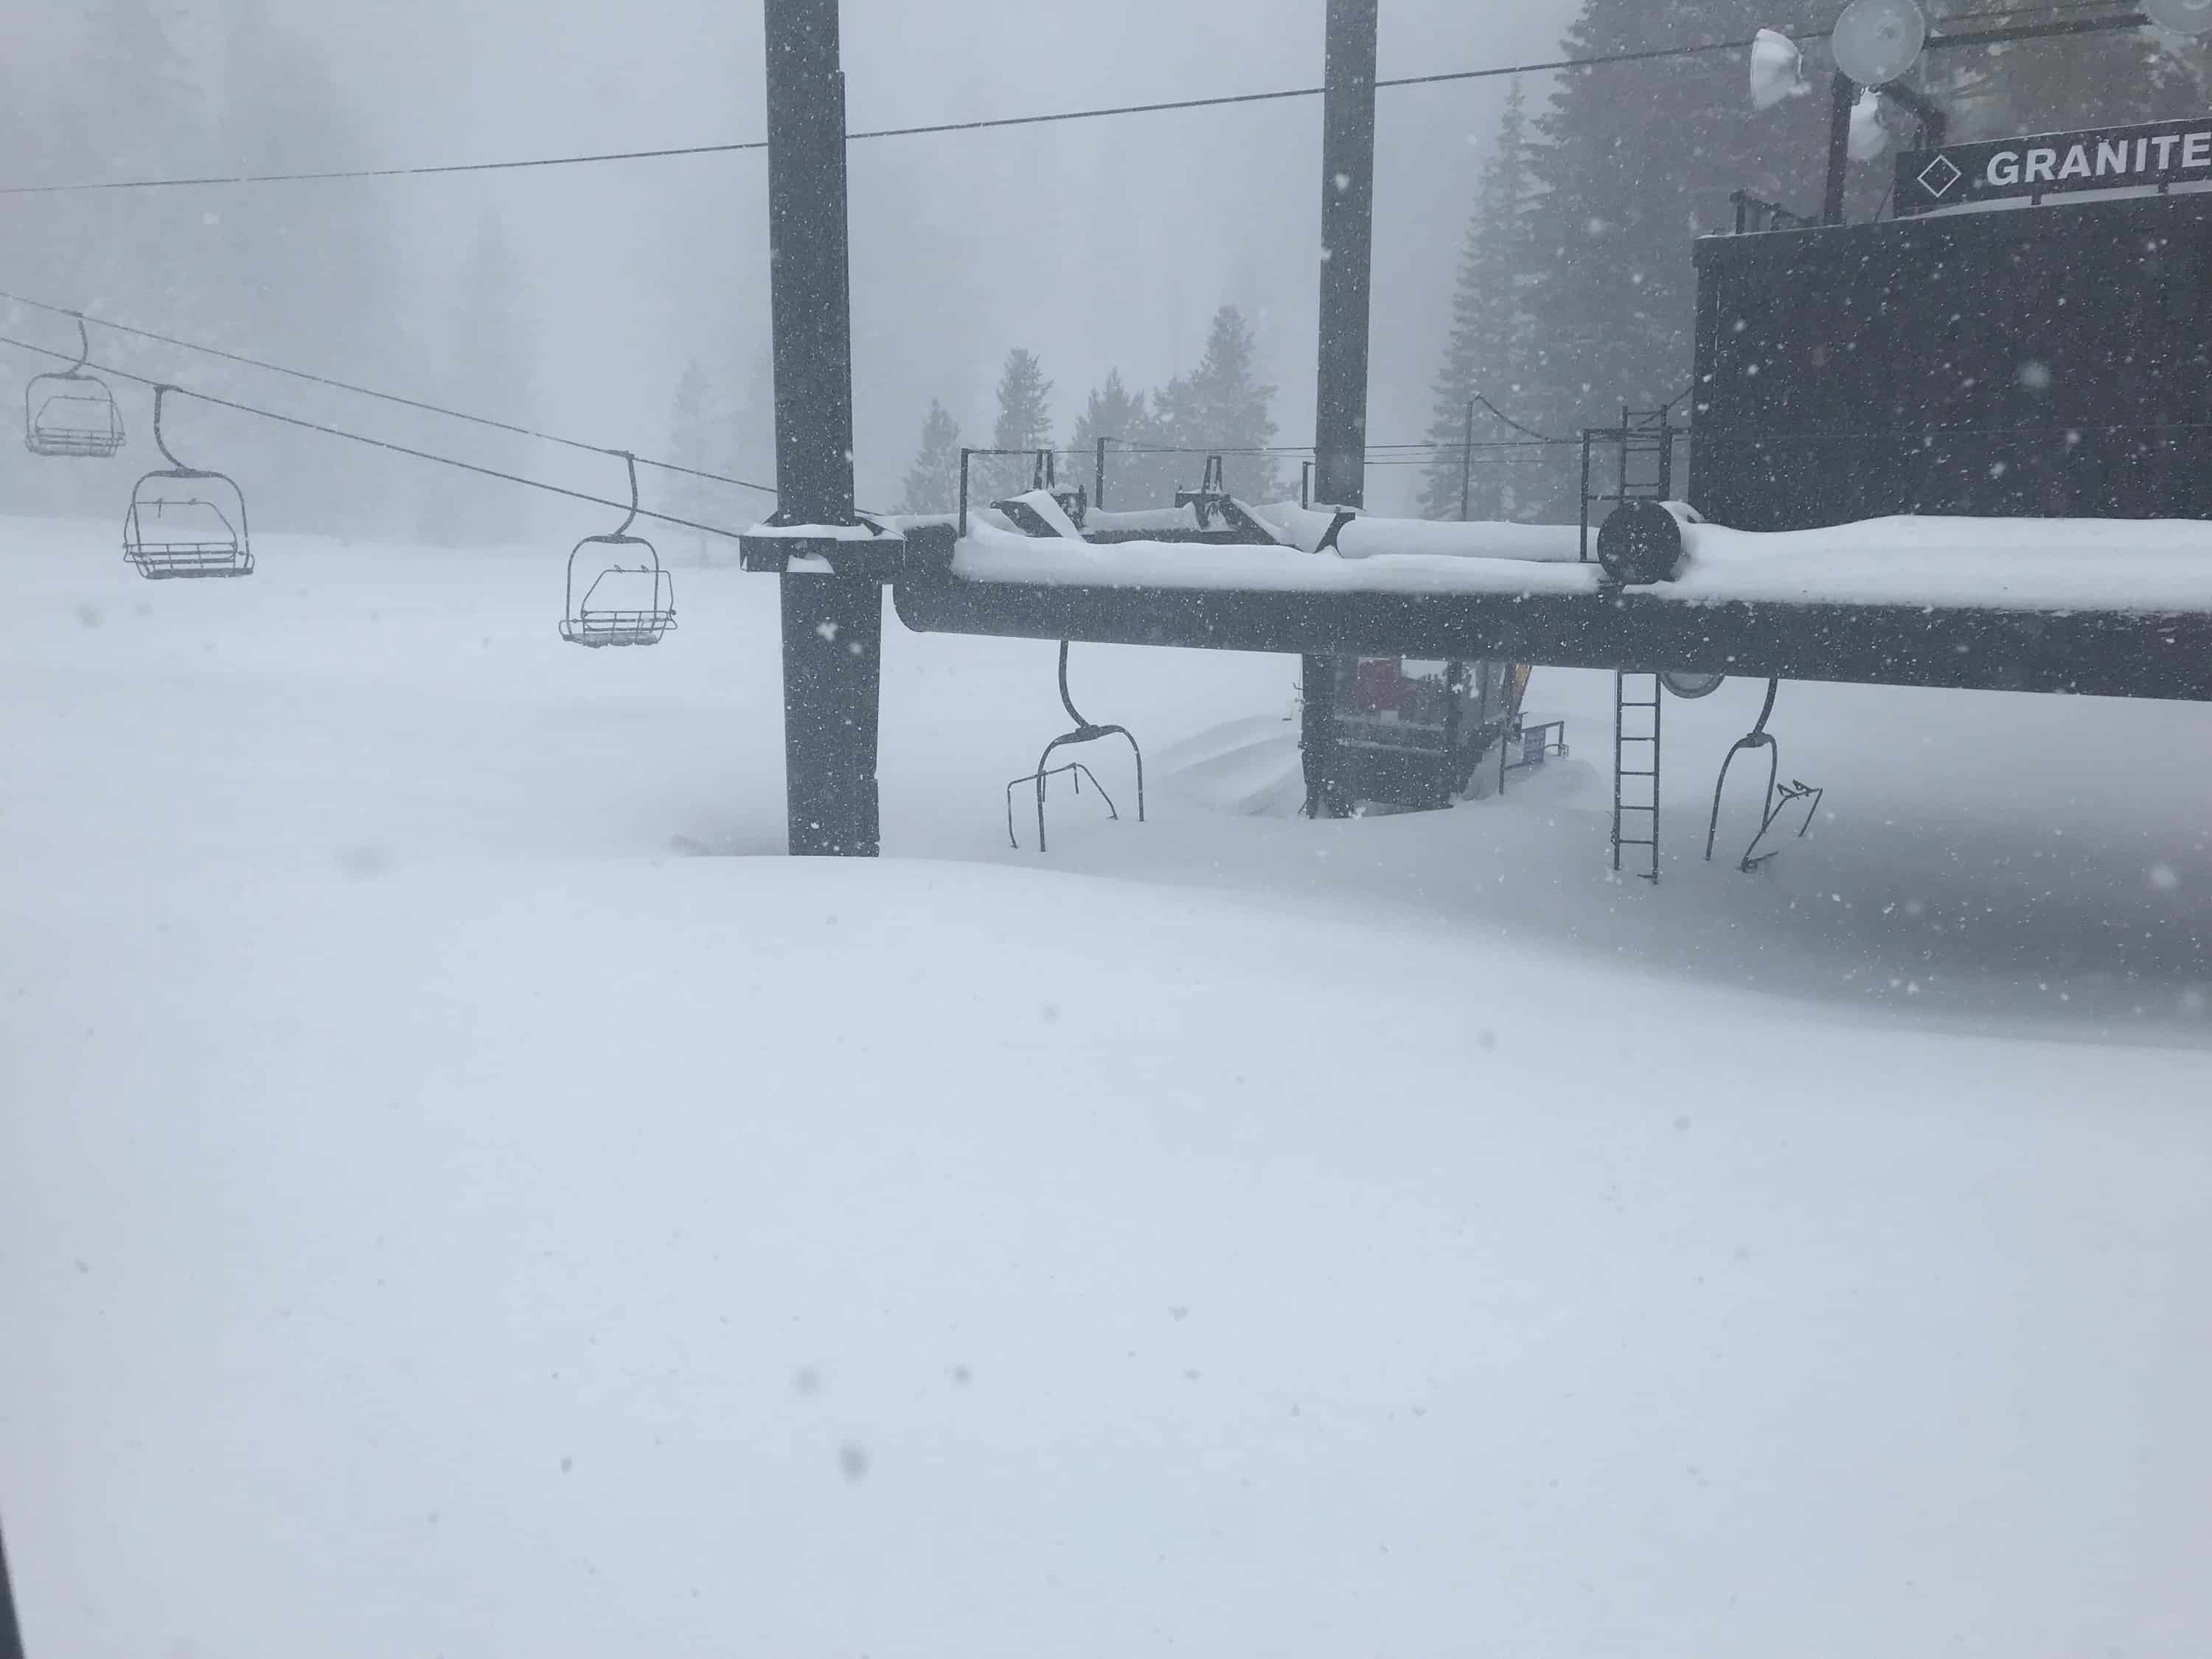 Squaw Snow Report predicted heavy snow, base station of Granite Chief Chair